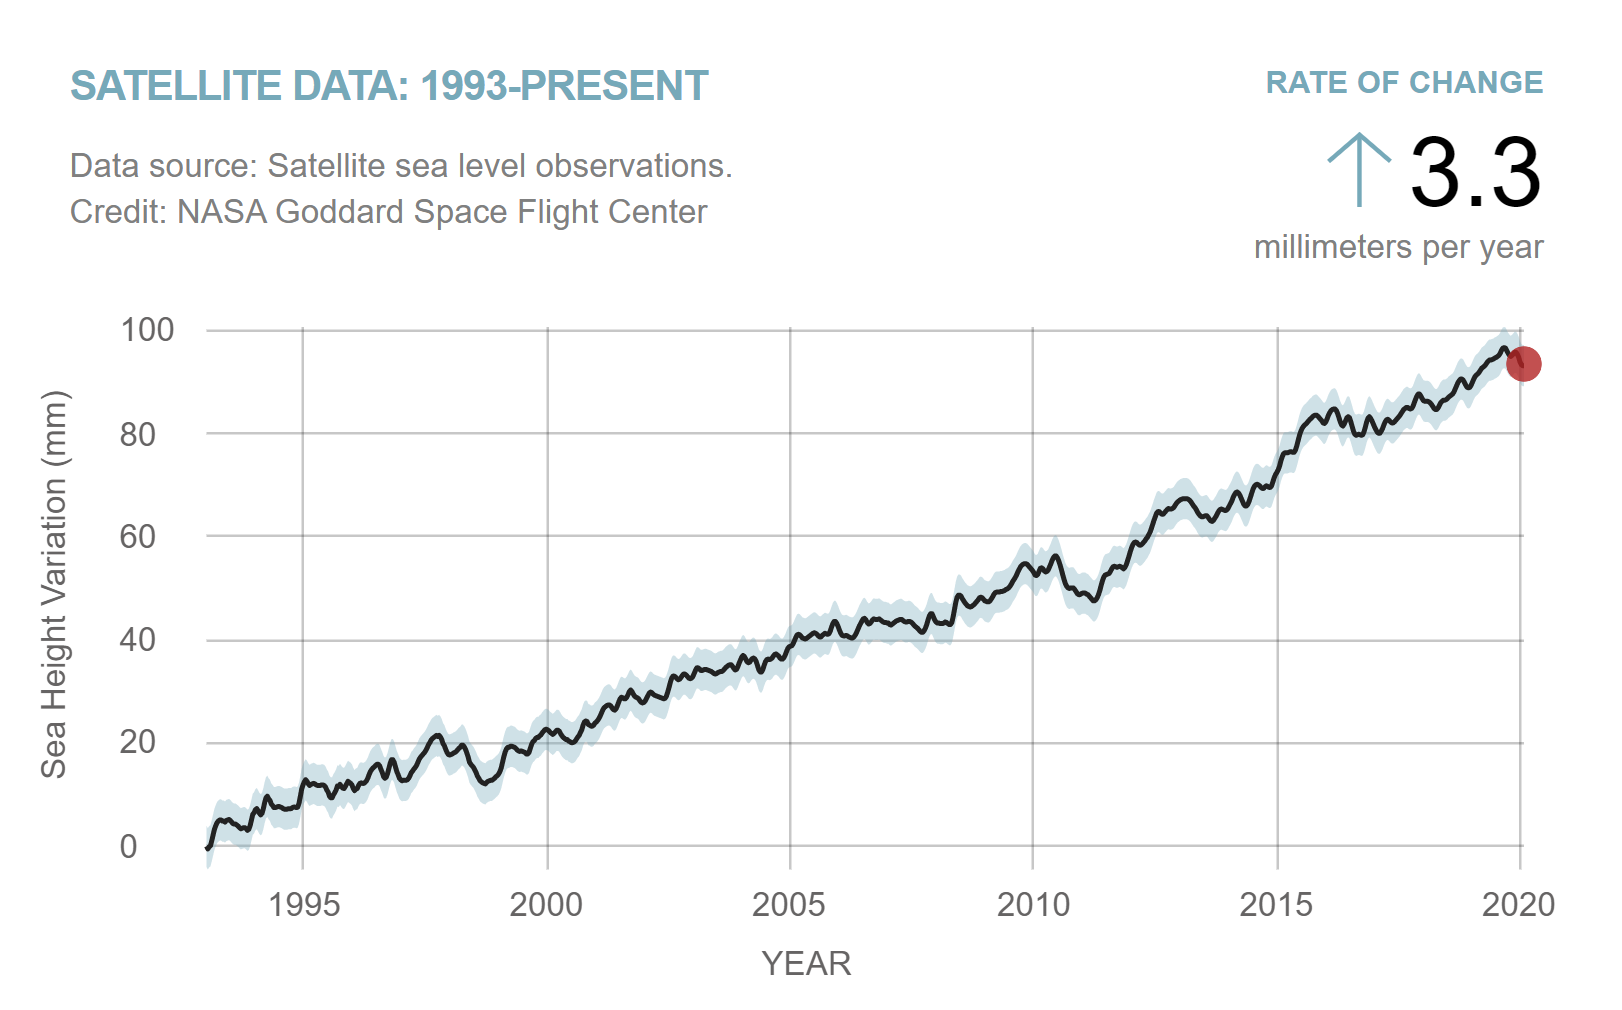 This chart shows the rise in global average sea level from January 1993 to January 2020